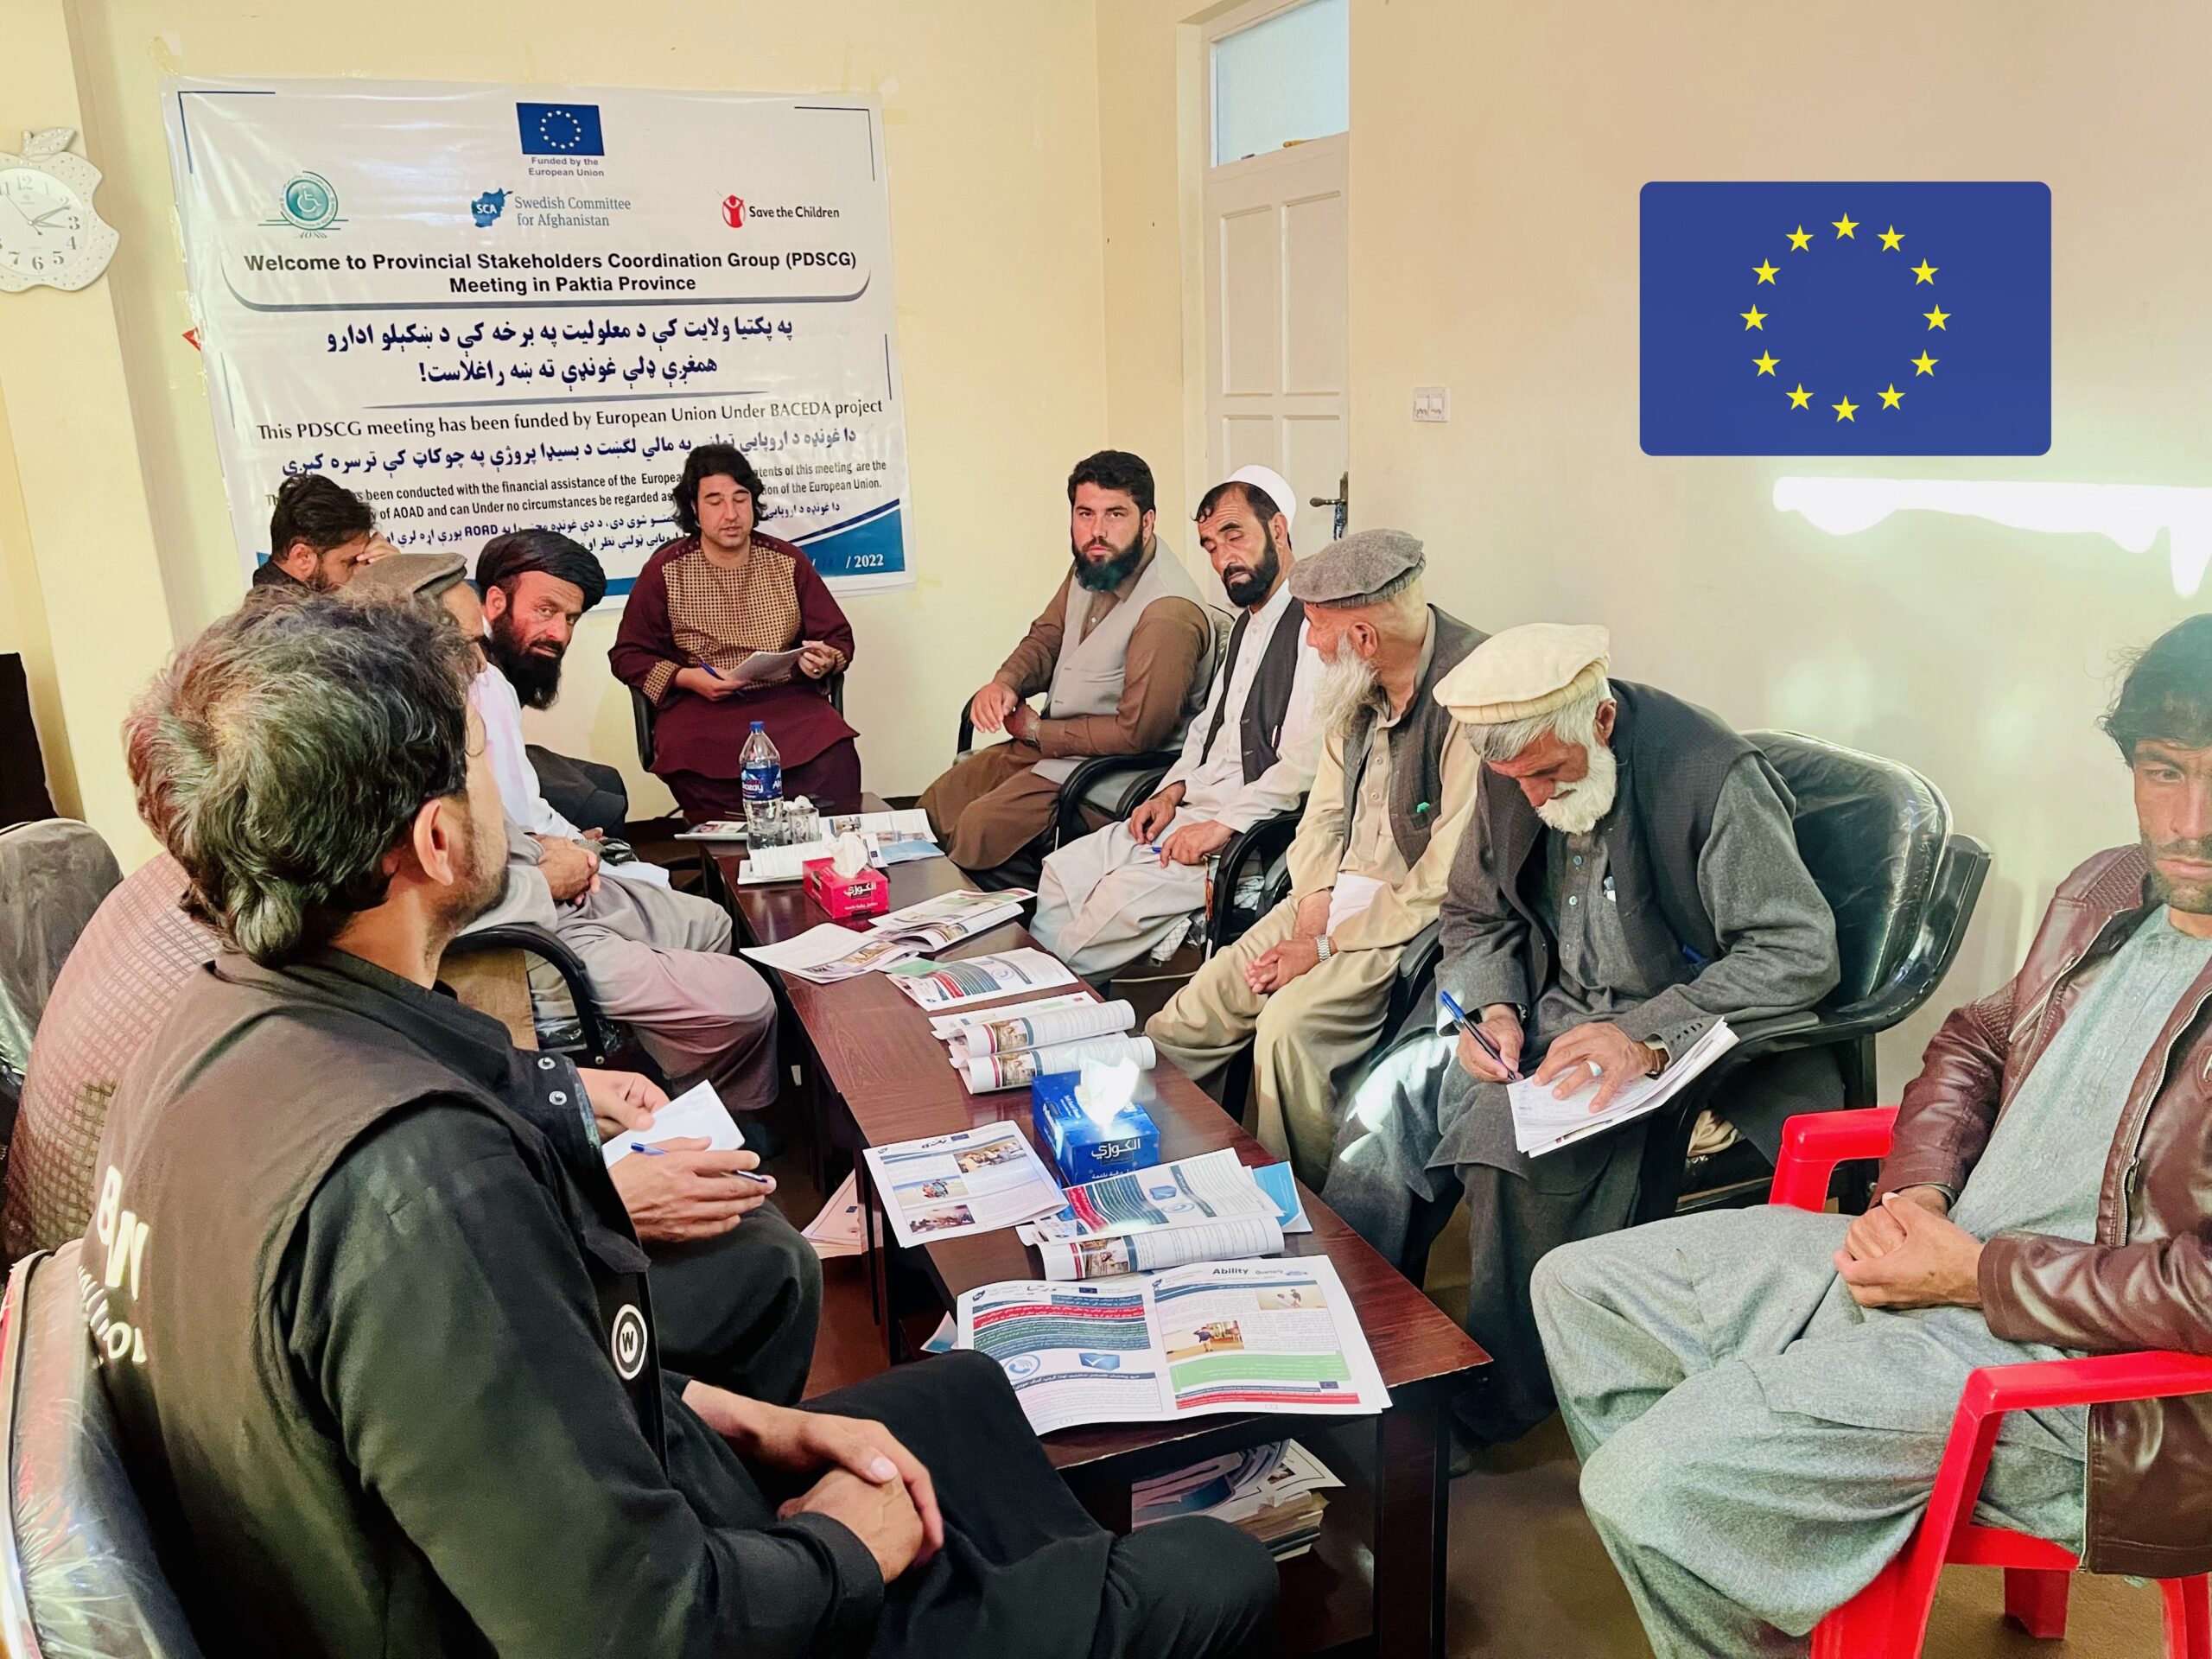 Paktia office conducted a one-day Disability Stakeholders Coordination Group joint workshop